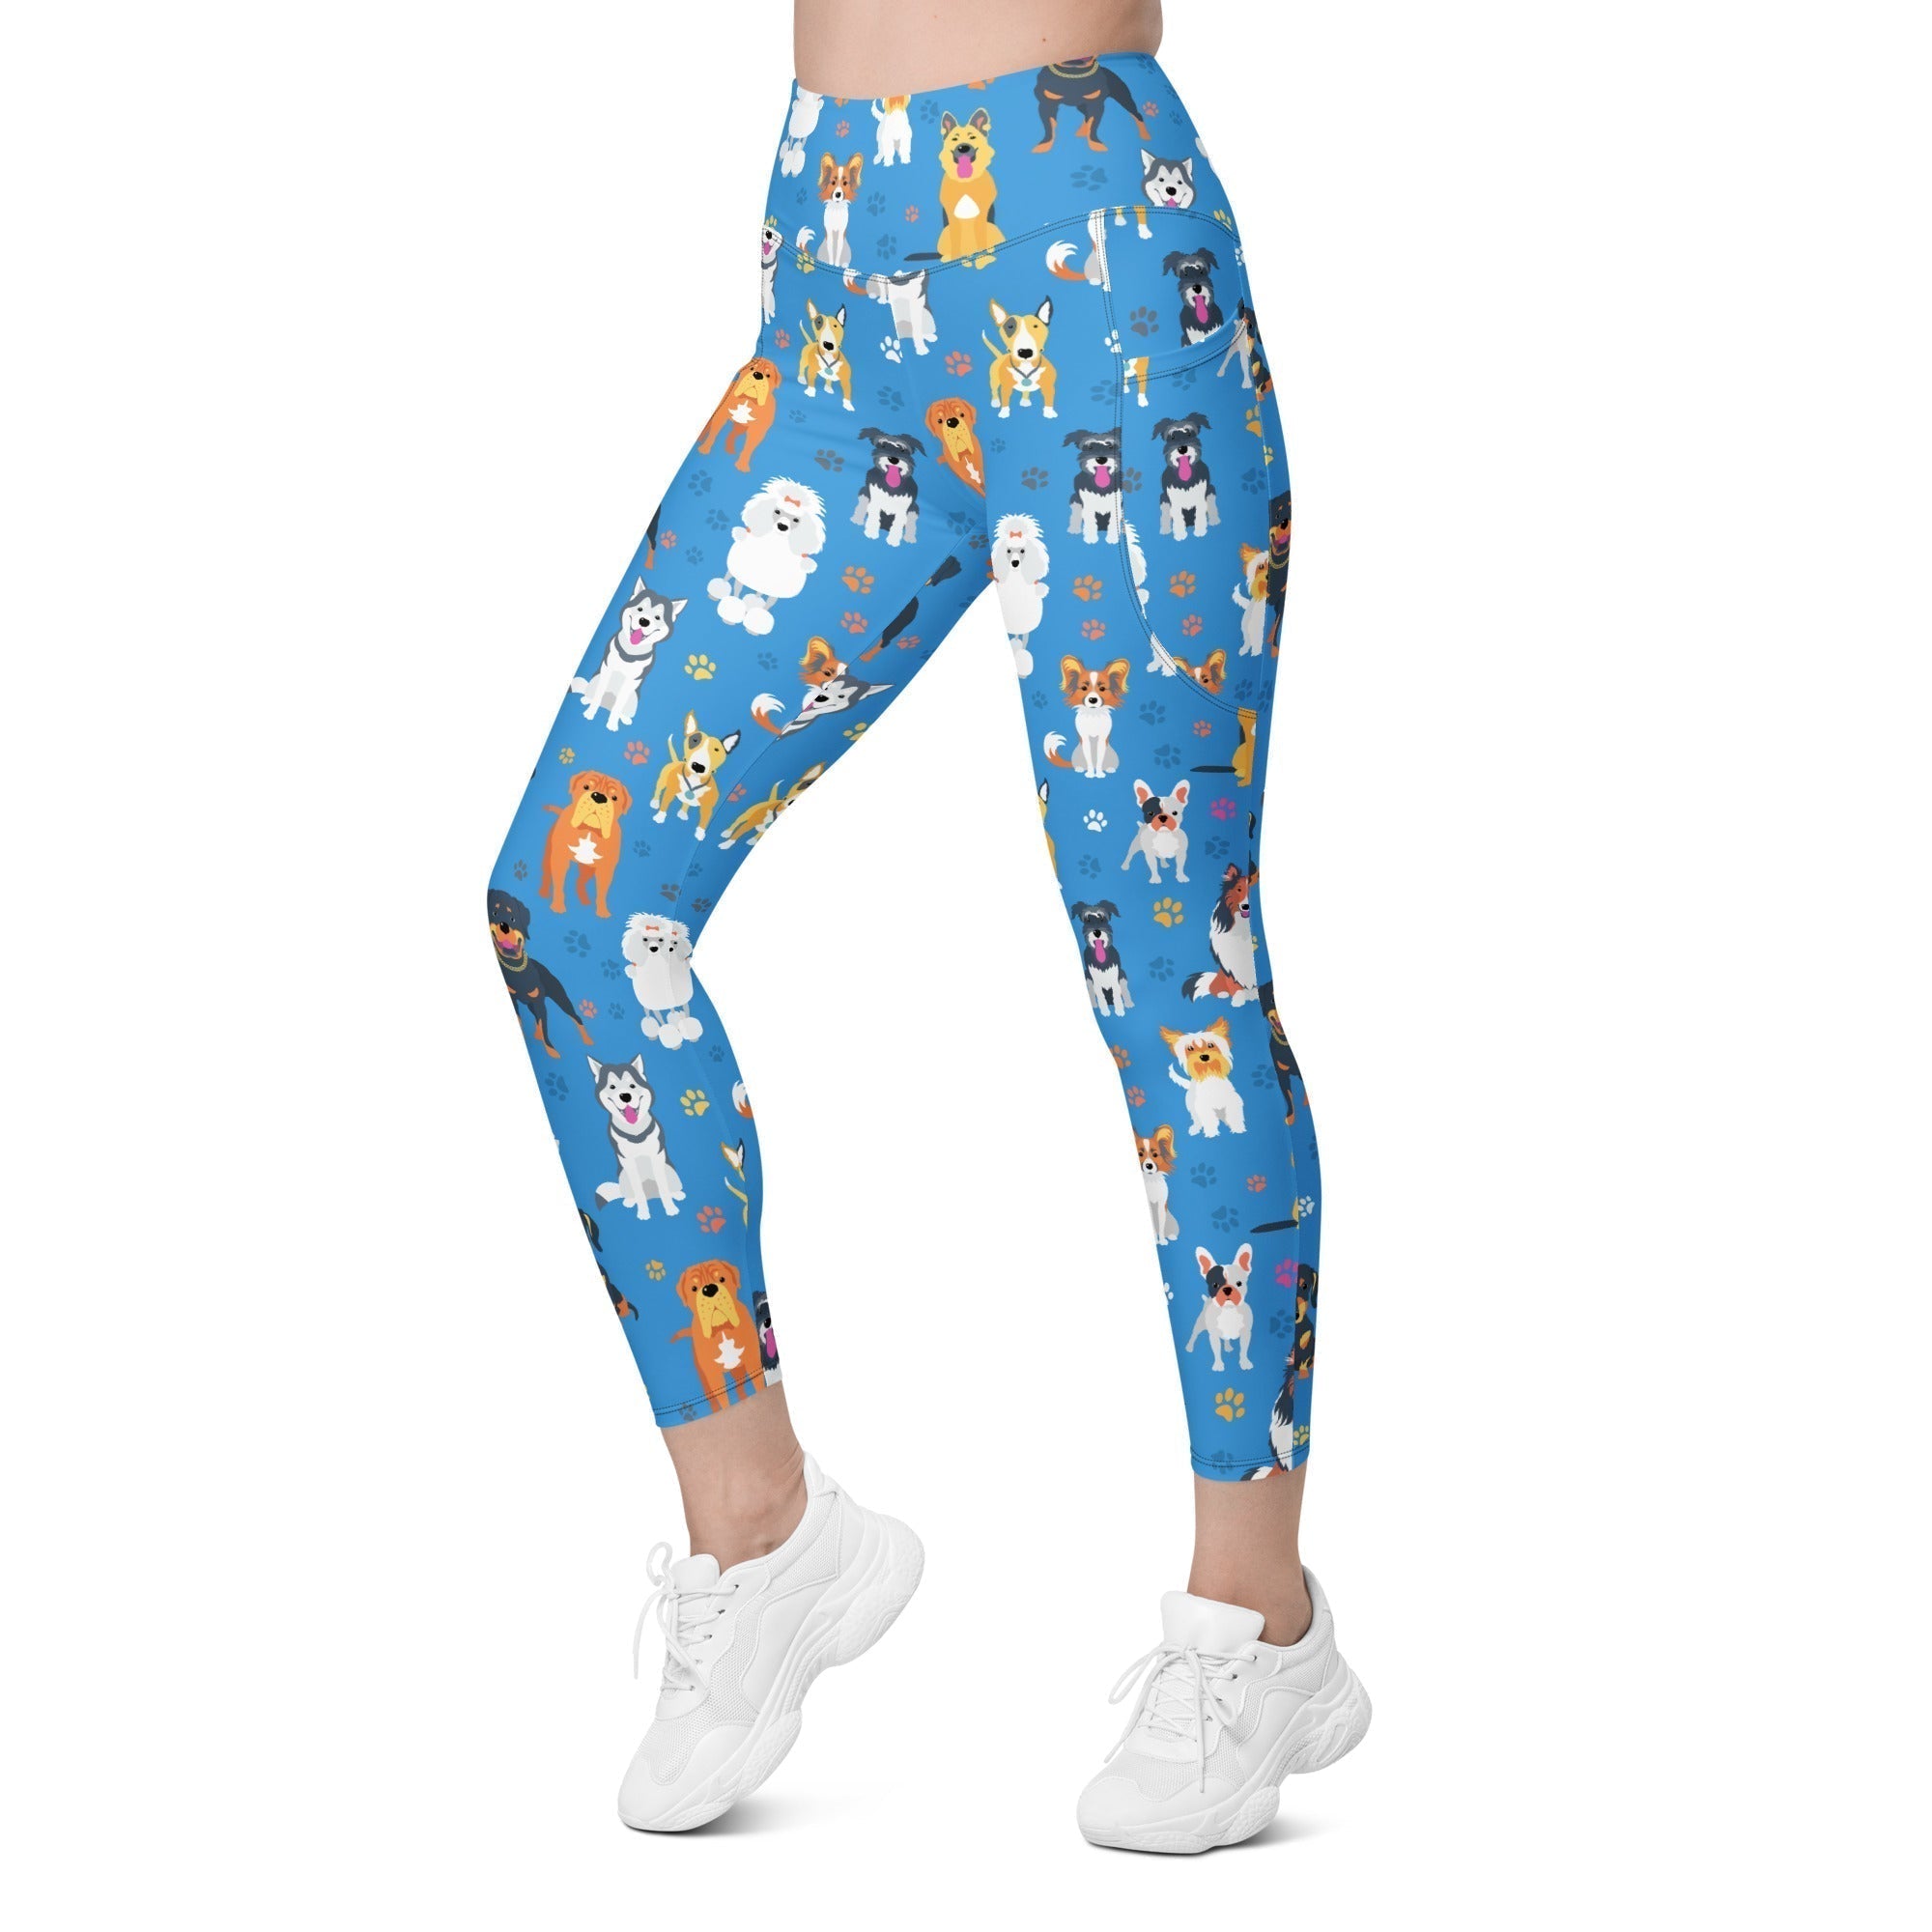 Puppies & Paws Leggings With Pockets